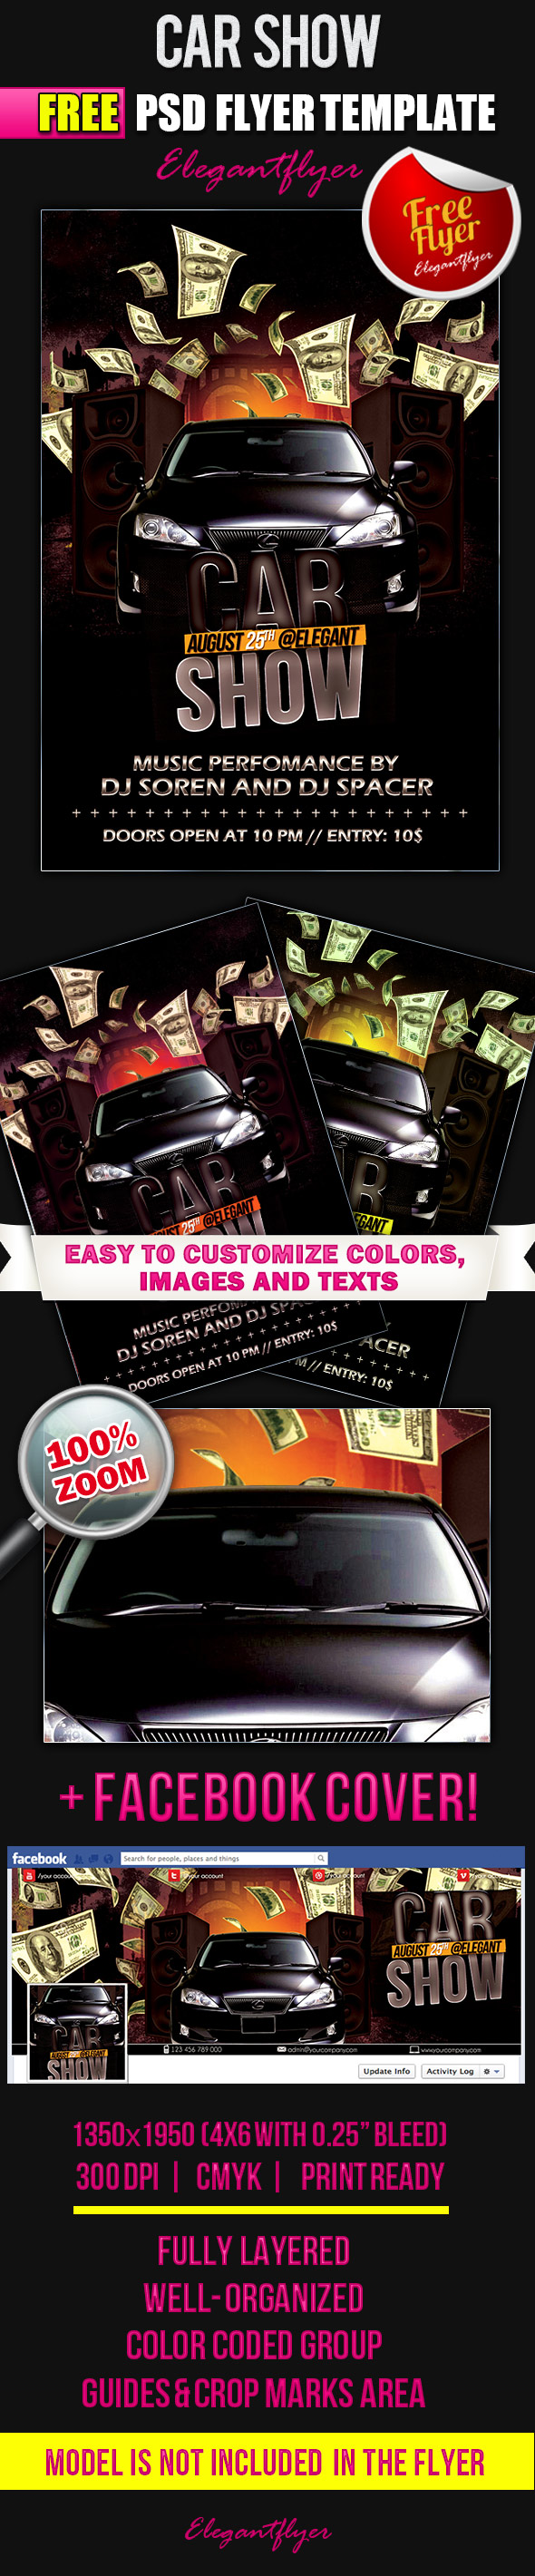 Car Show Flyer Templates Free